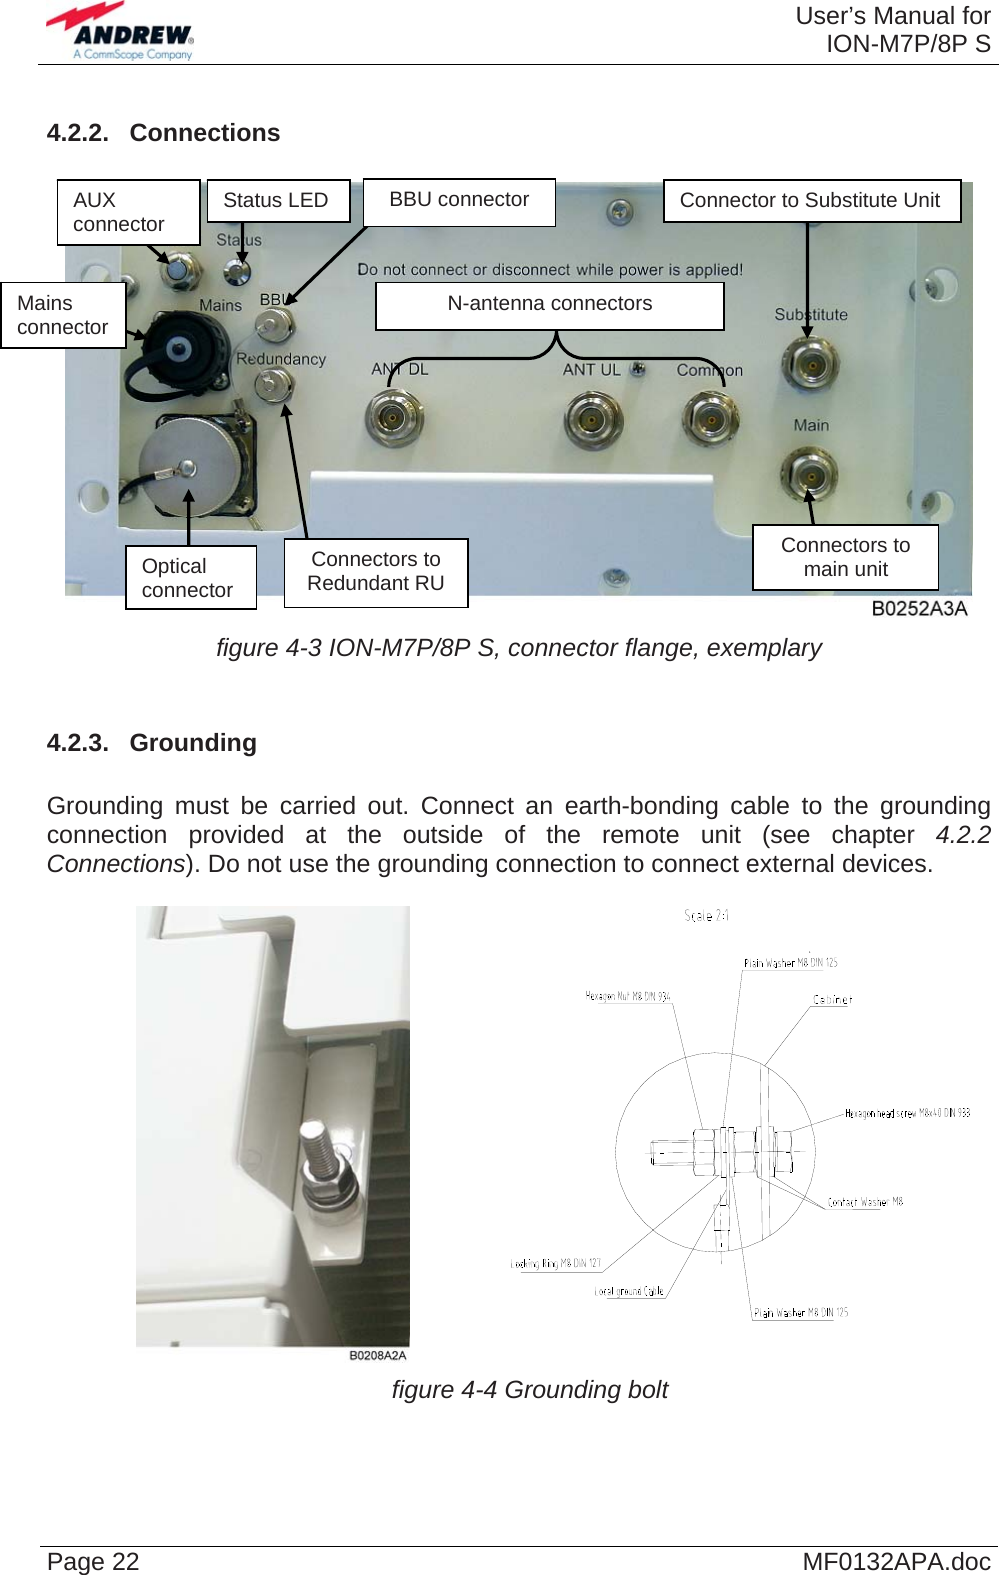  User’s Manual forION-M7P/8P S Page 22  MF0132APA.doc4.2.2.  Connections    figure 4-3 ION-M7P/8P S, connector flange, exemplary  4.2.3.  Grounding  Grounding must be carried out. Connect an earth-bonding cable to the grounding connection provided at the outside of the remote unit (see chapter 4.2.2 Connections). Do not use the grounding connection to connect external devices.    figure 4-4 Grounding bolt  Optical connector Status LED Mains connector Connector to Substitute Unit Connectors to main unit AUX   BBU connector connector N-antenna connectors Connectors to Redundant RU 